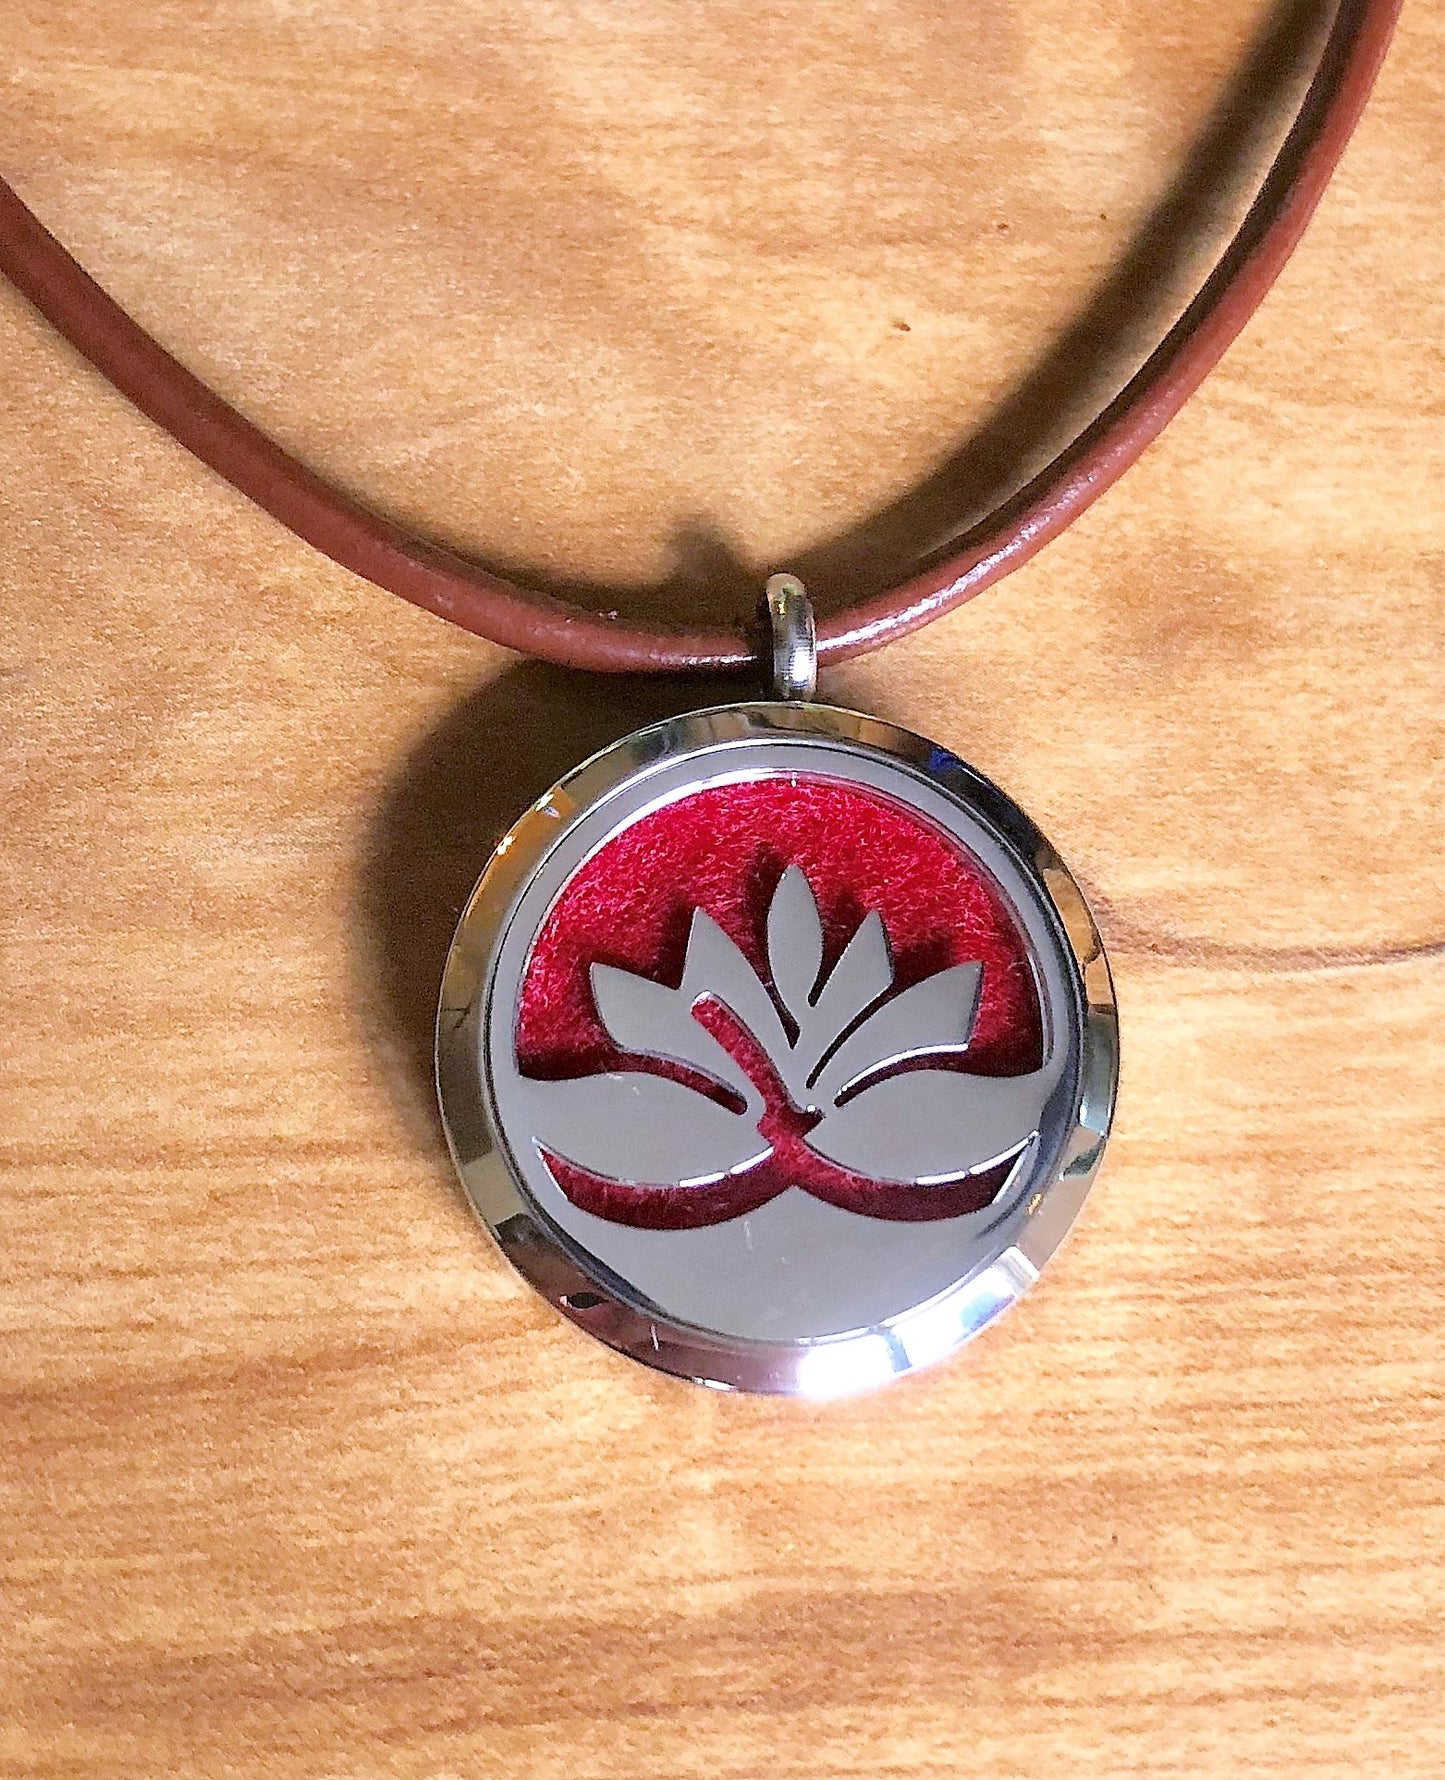 Lotus - Essential Oil Diffuser Necklace -Free Shipping